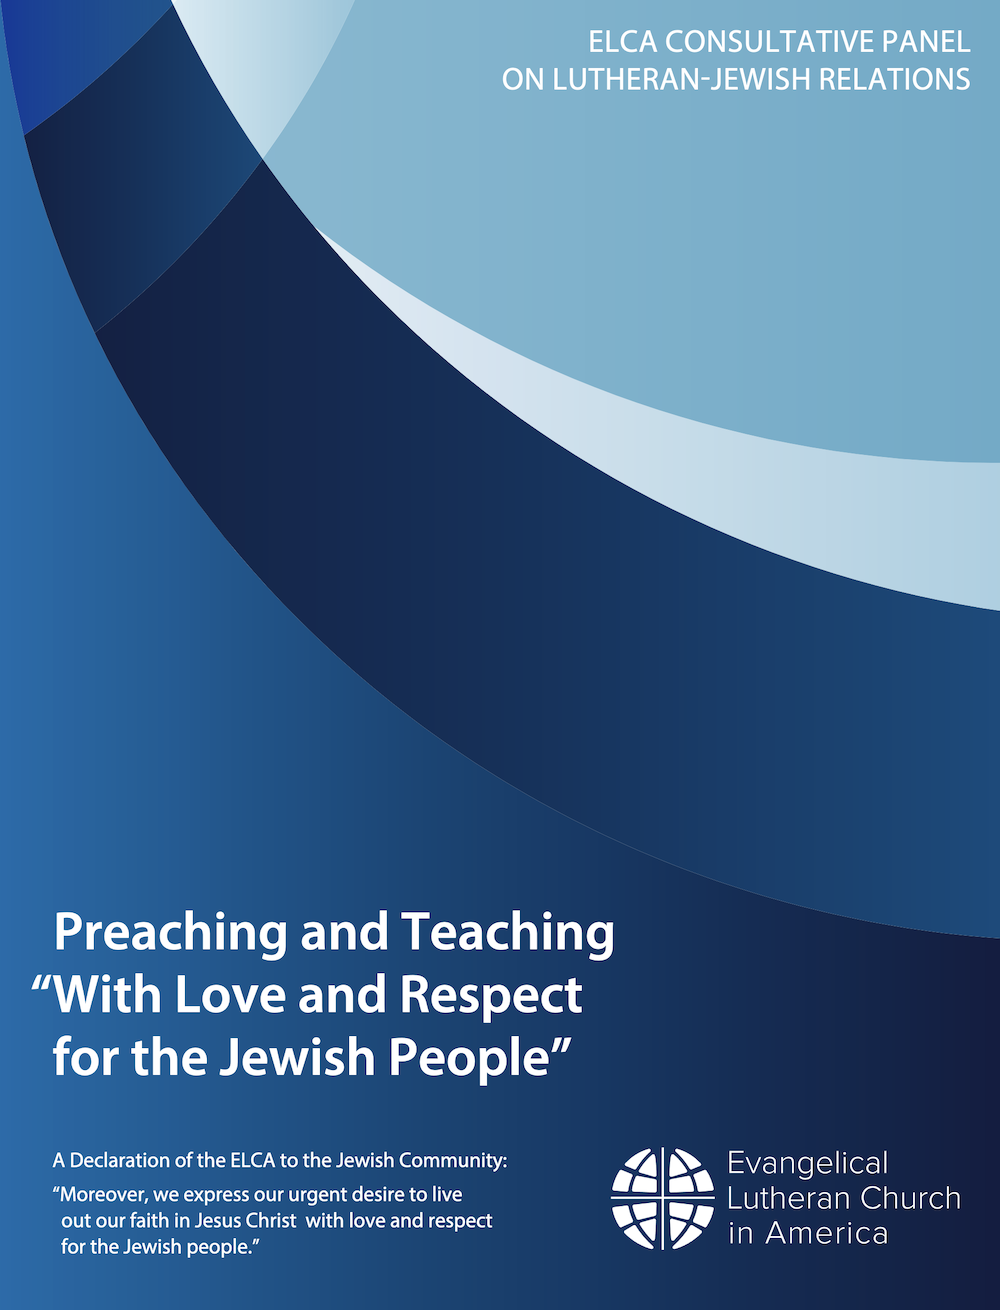 Preaching and Teaching “With Love and Respect for the Jewish People”